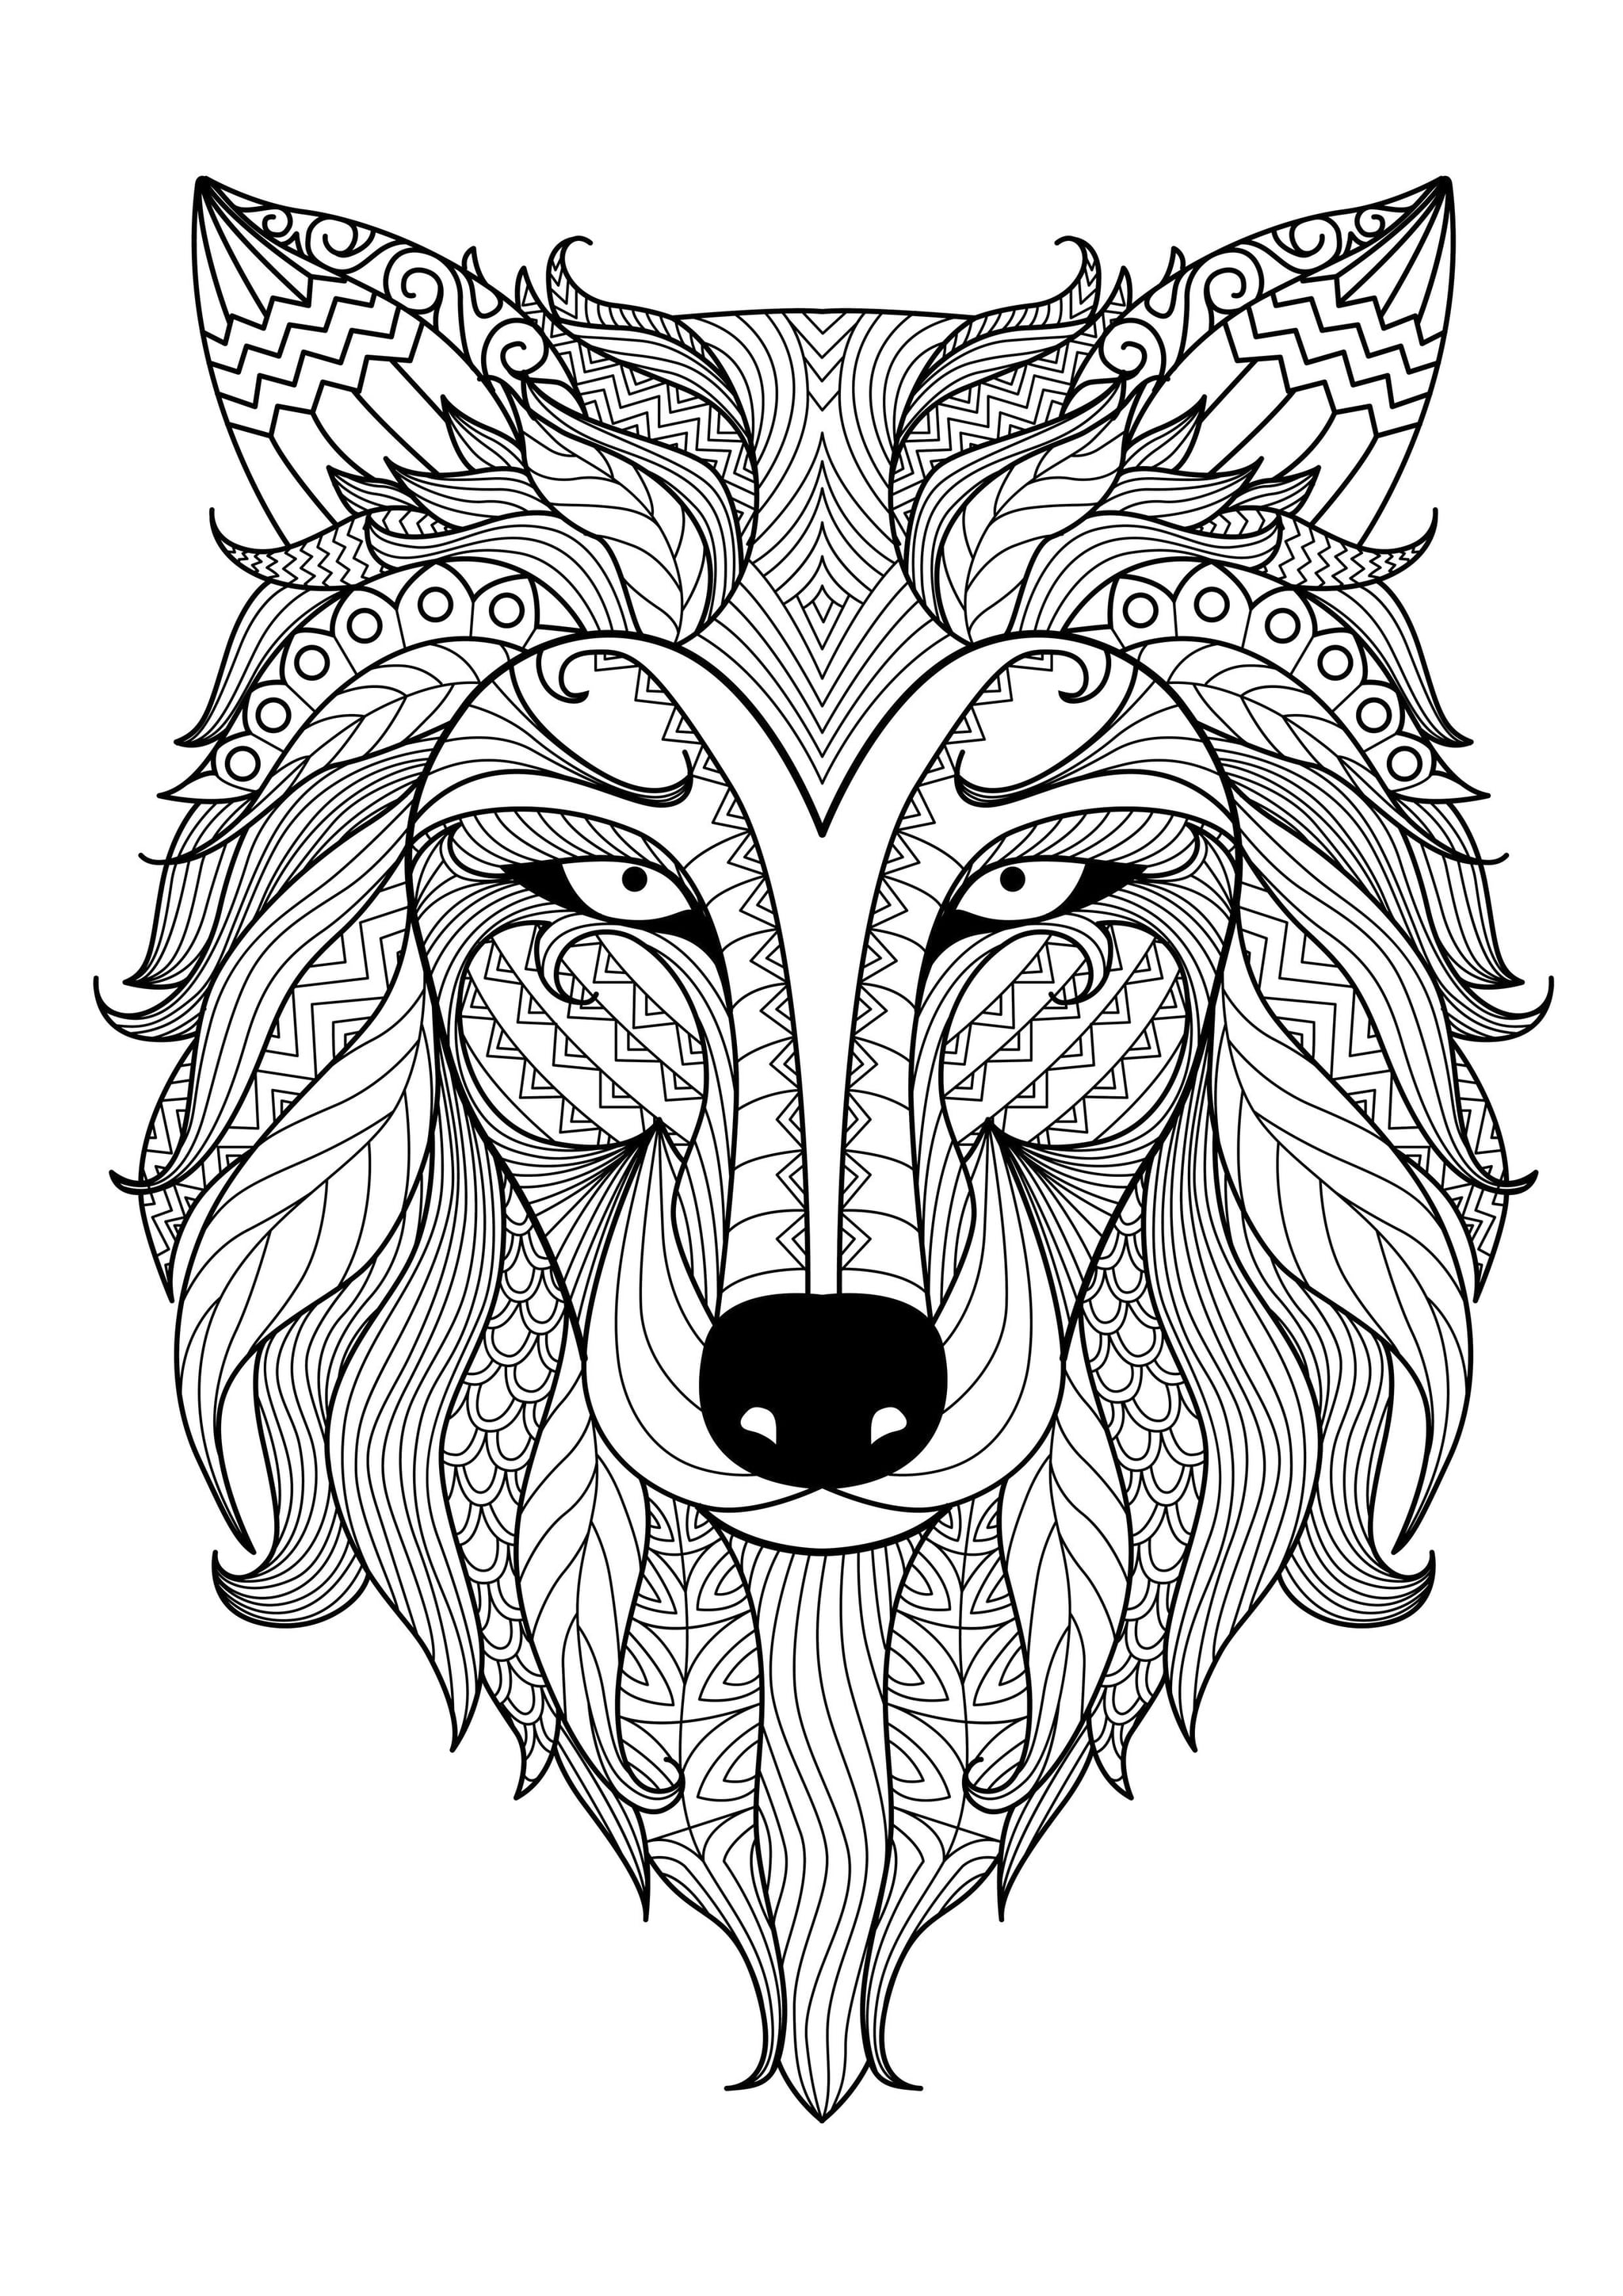 Printable Wolf zentangle Coloring Page for kids.